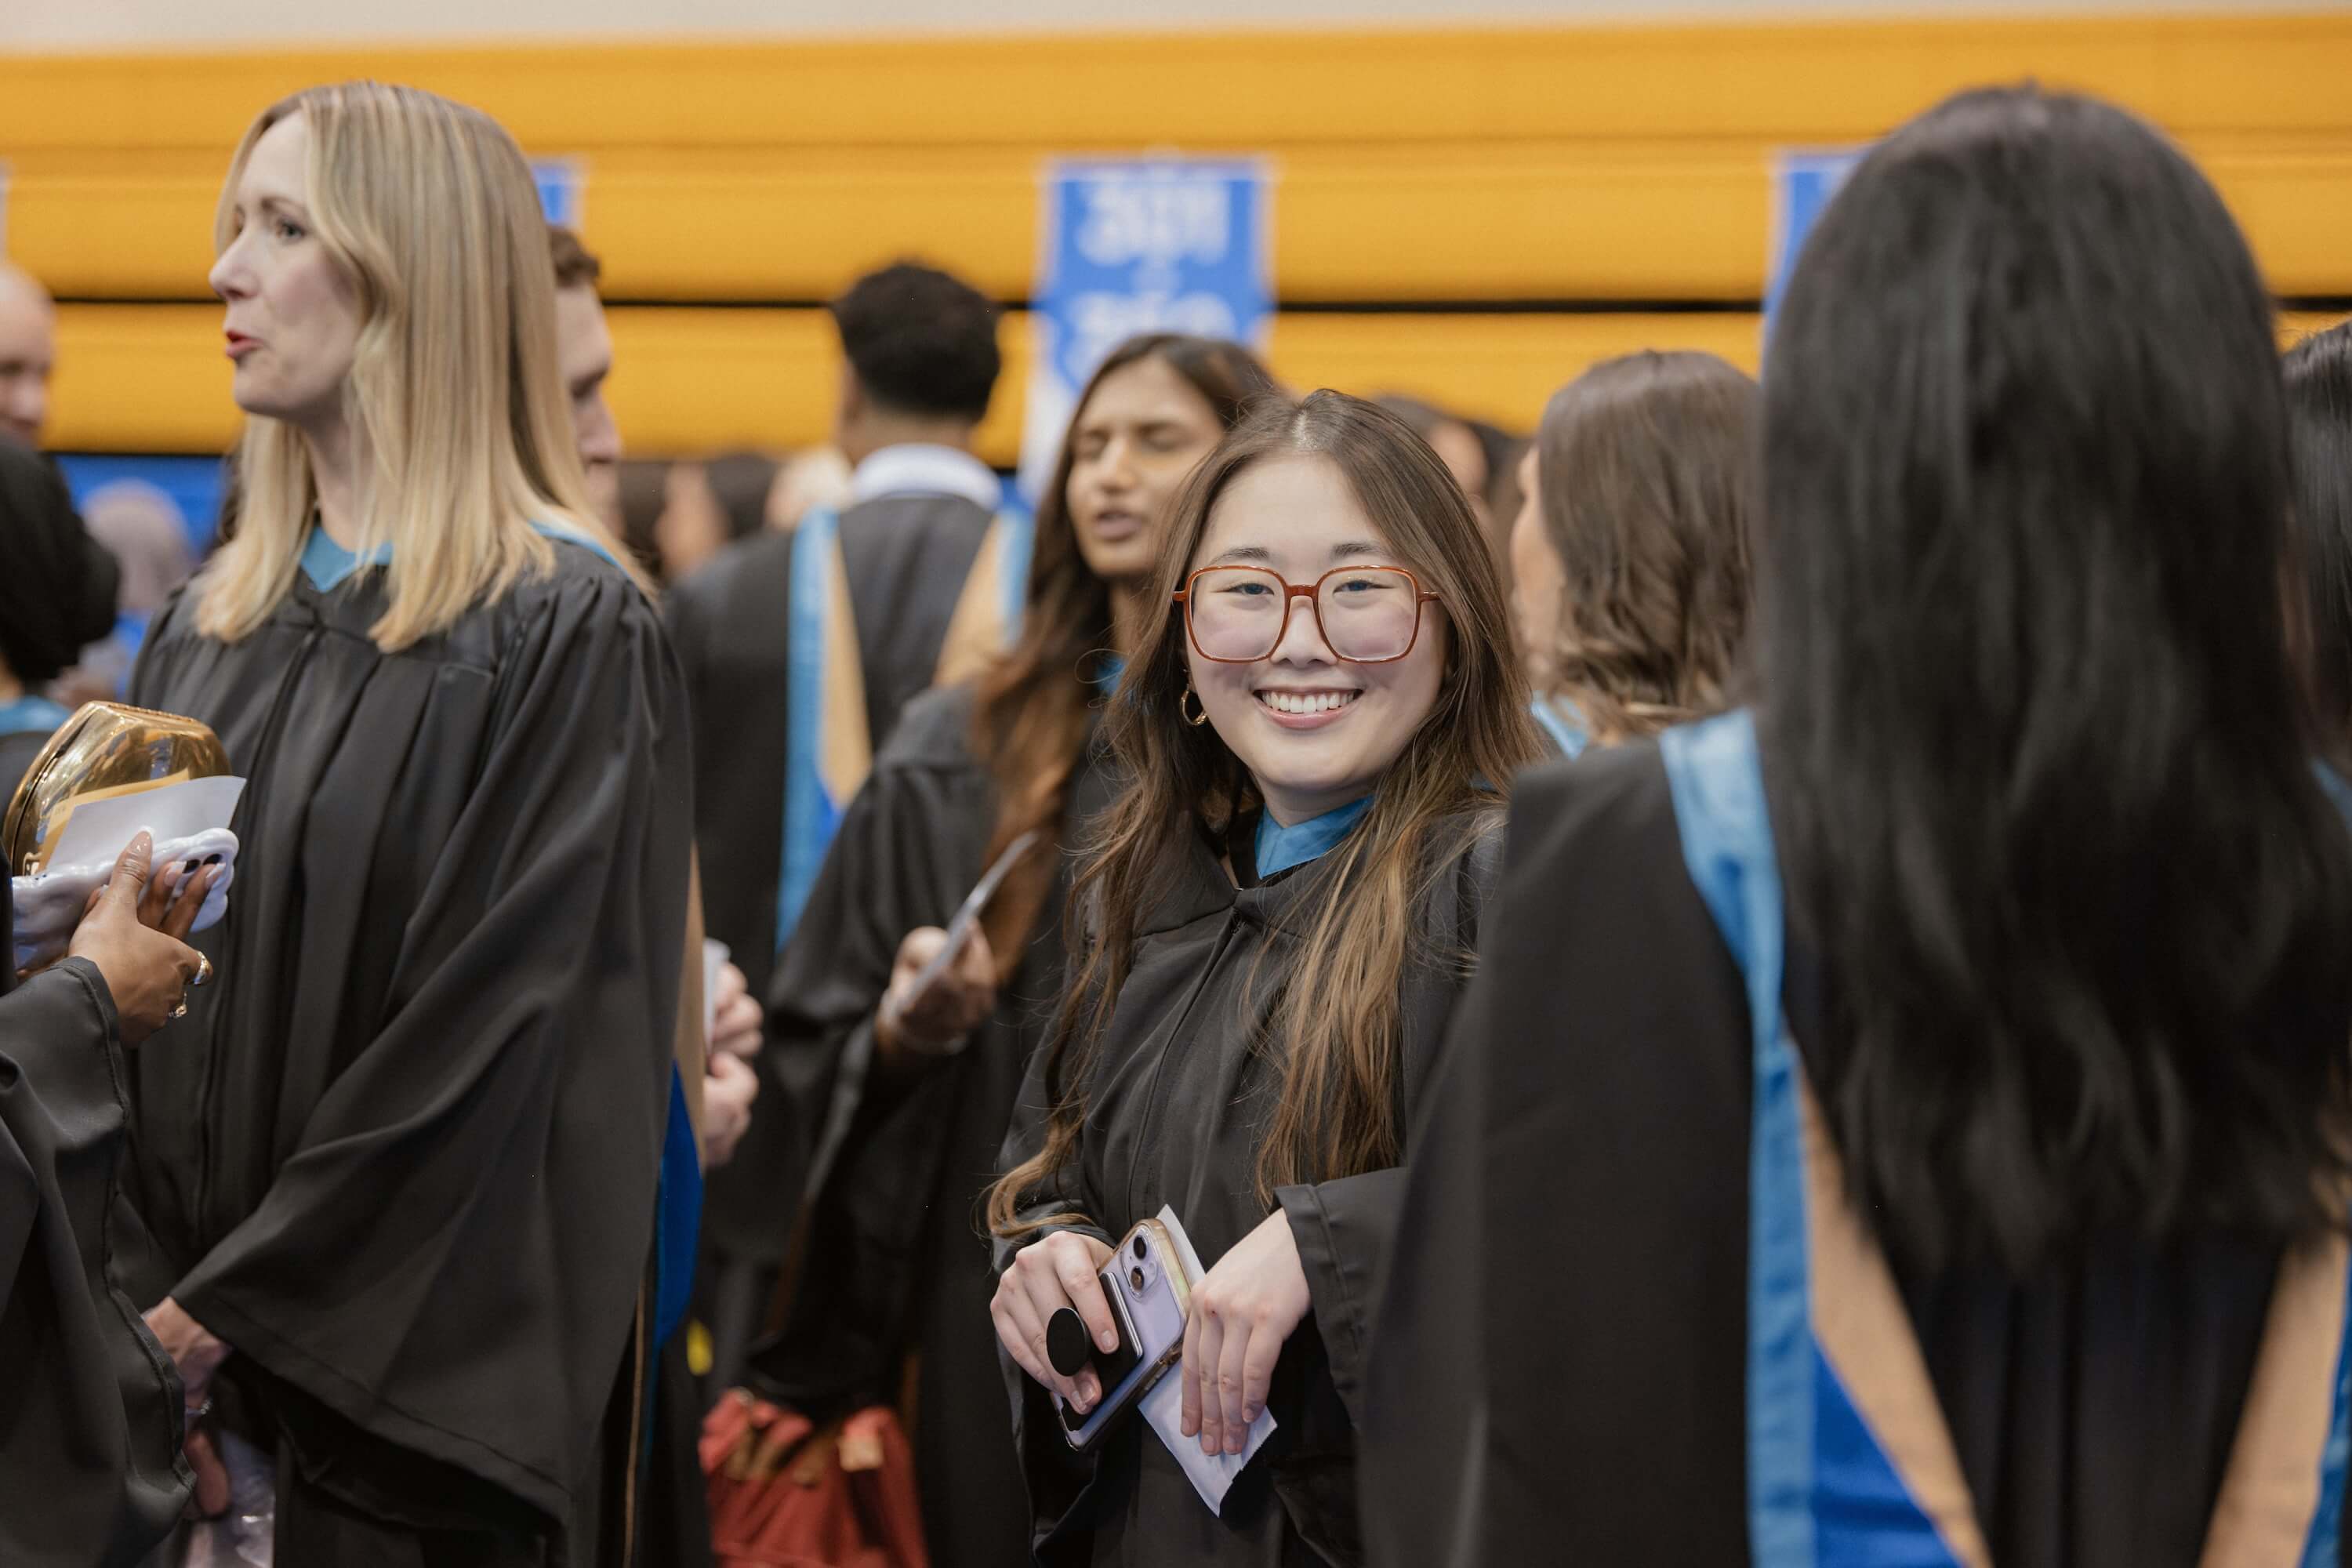 A woman smiling at the camera, surrounded by fellow graduates in graduation gowns at Convocation.